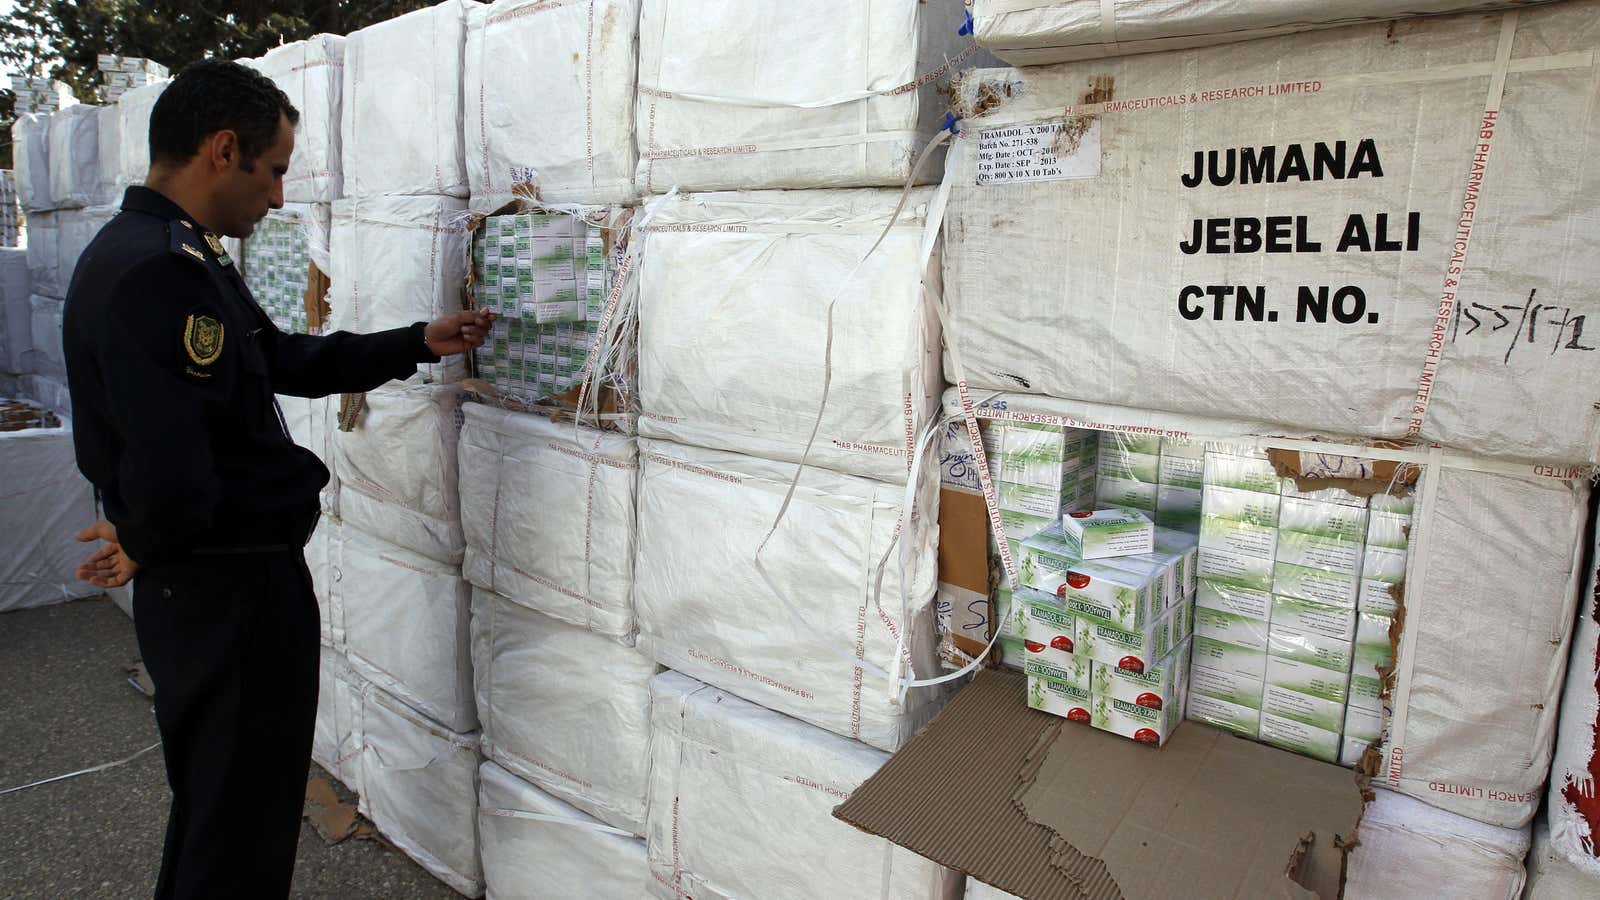 A Libyan police officer views a haul of prescription drug Tramadol seized from a shipping container in Tripoli